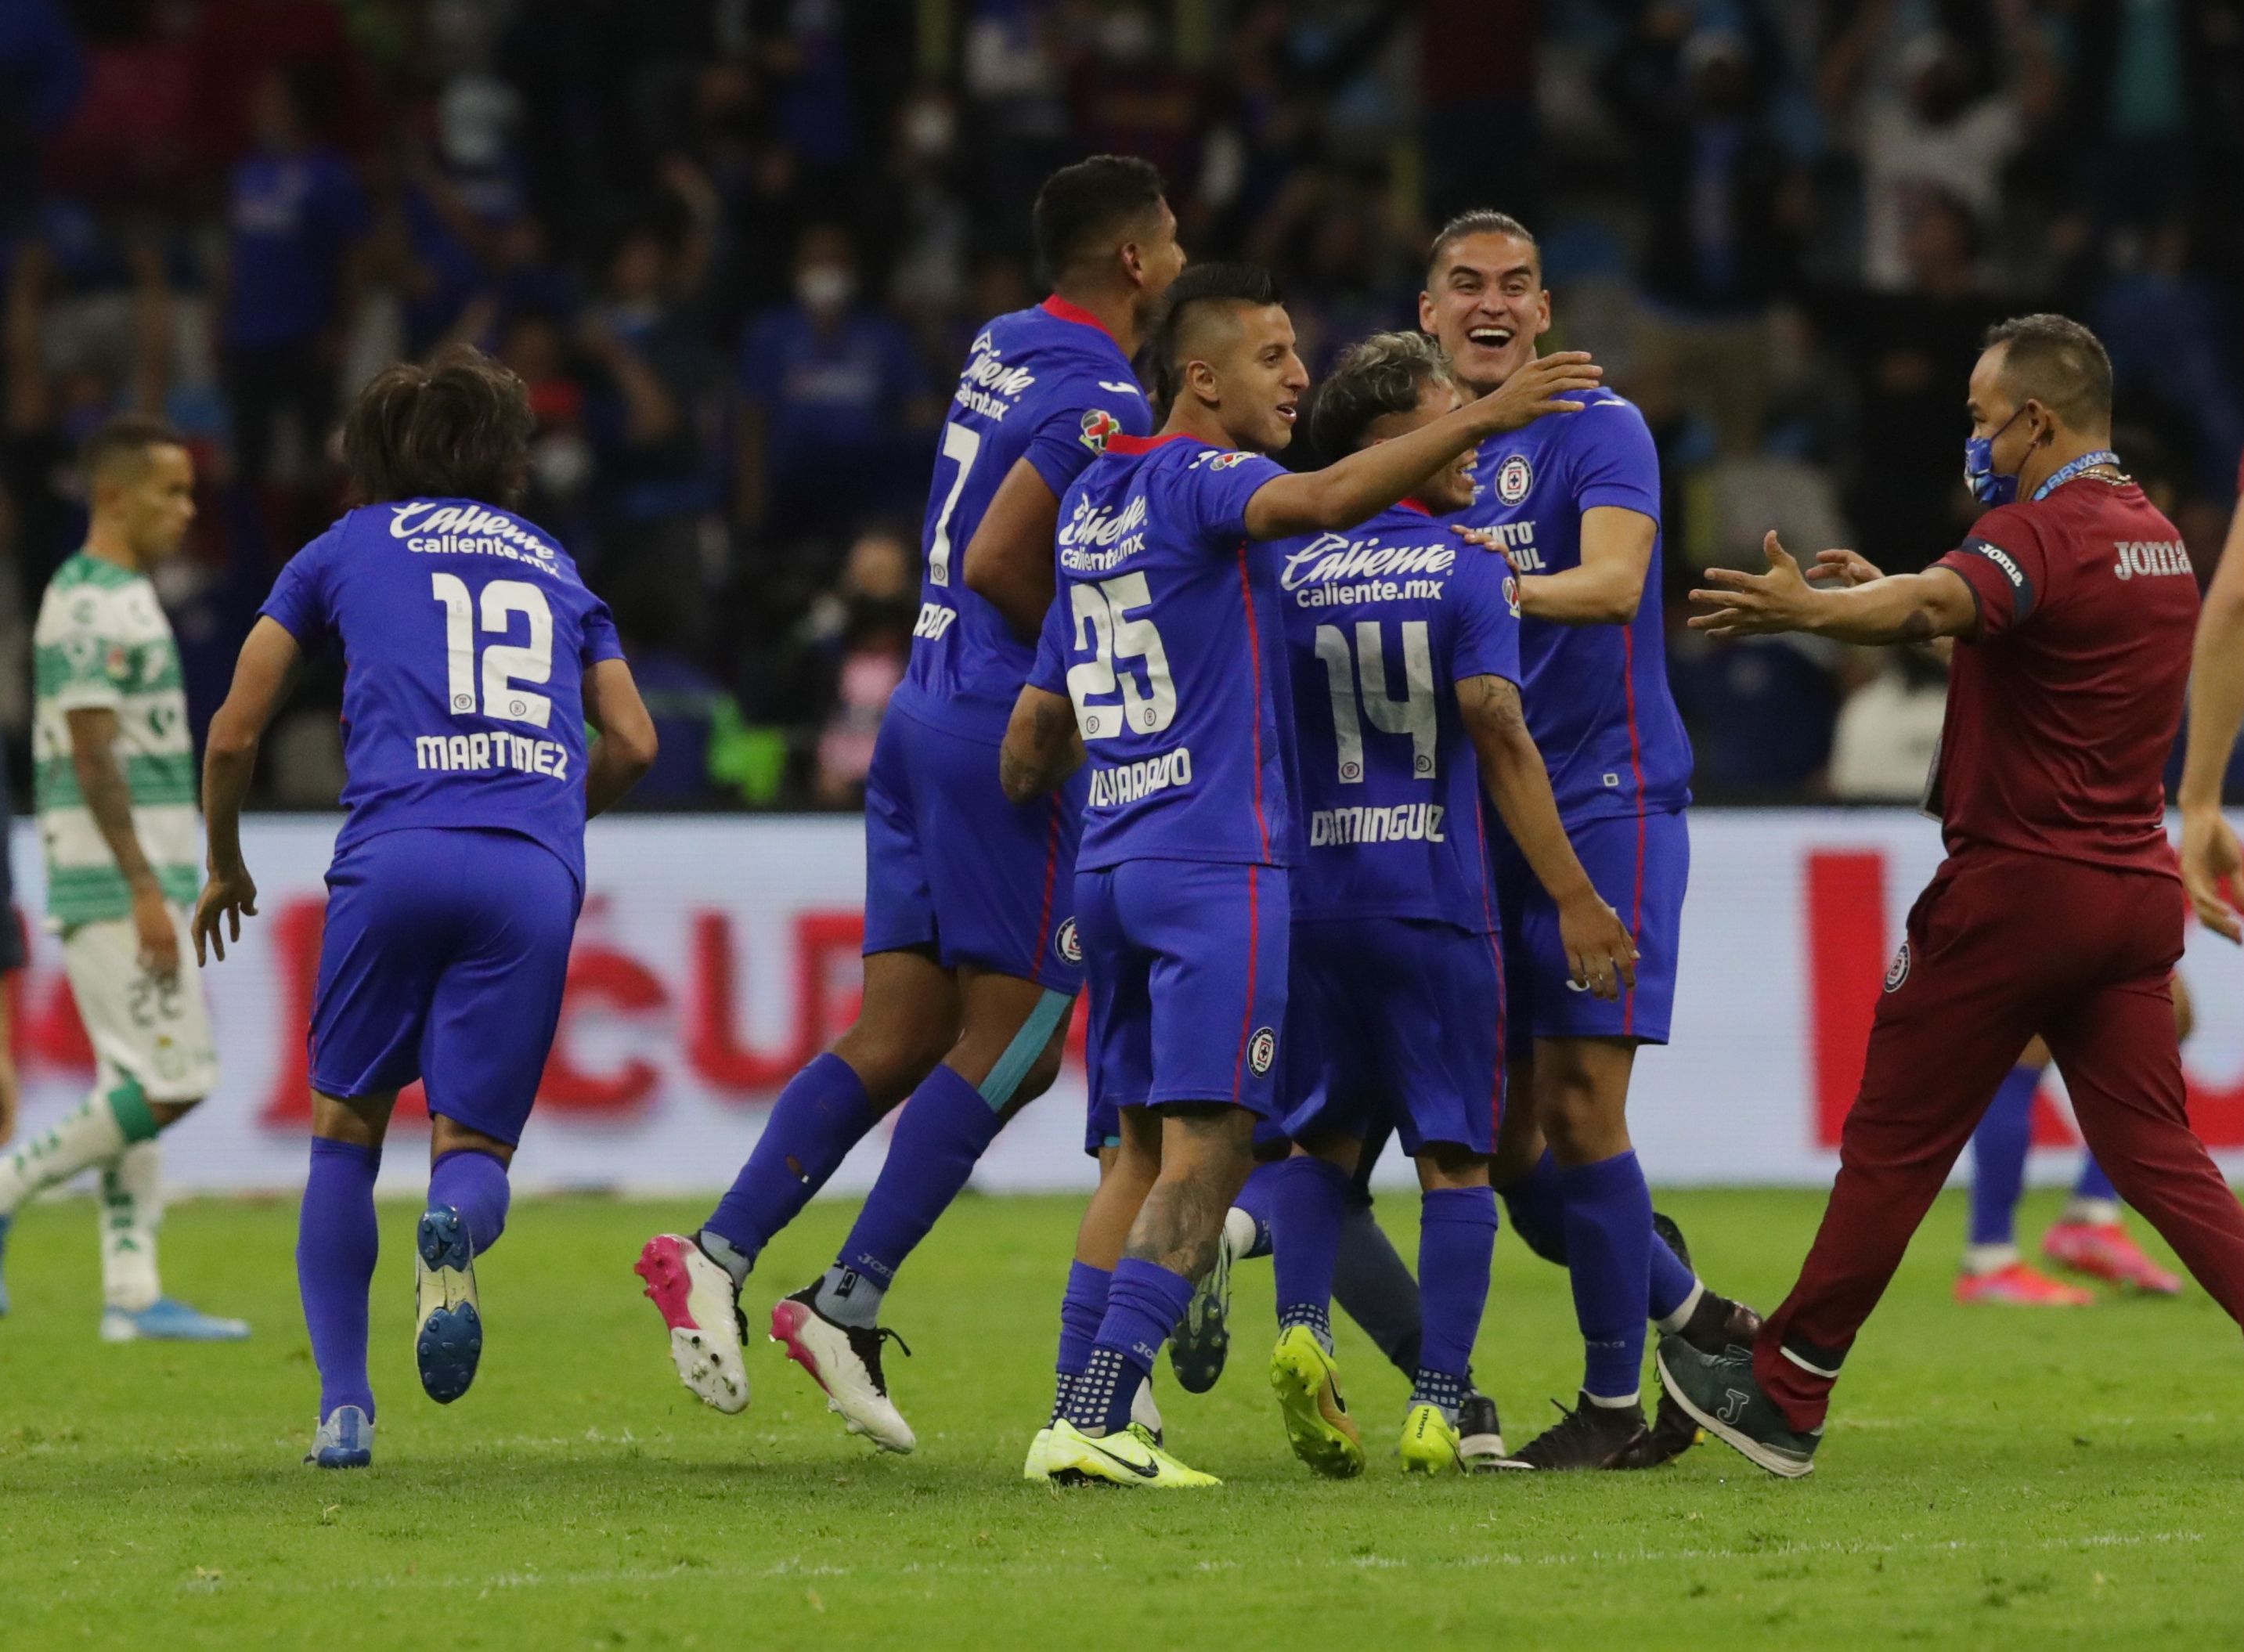 Cruz Azul vs Atlético San Luis: when and to watch the MX match - Infobae